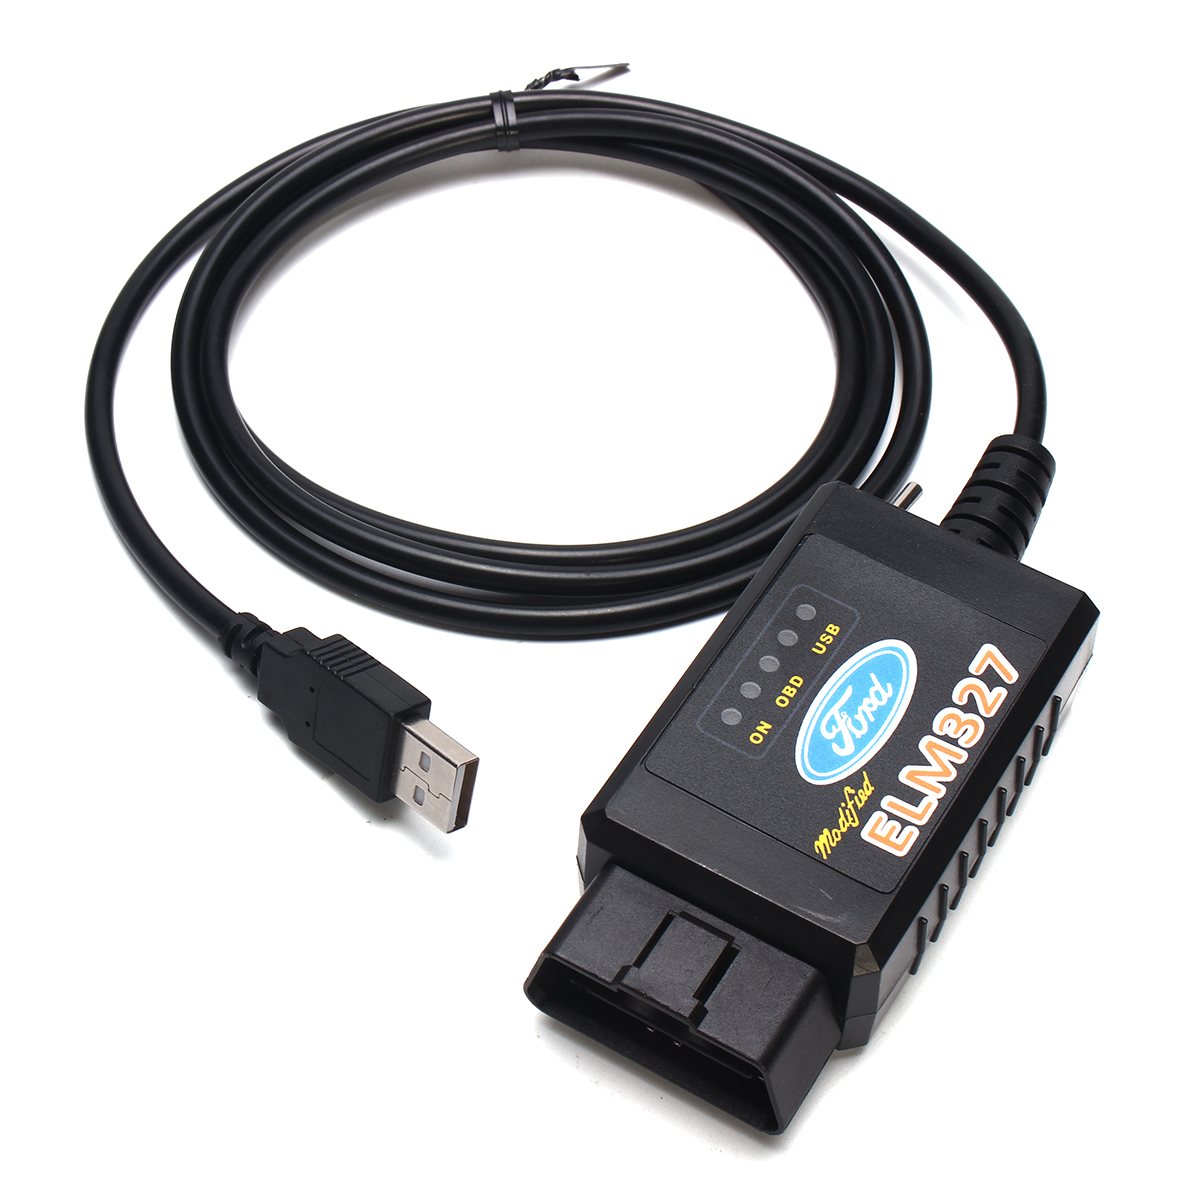 ELM327 USB Modified OBD2 Car Diagnostic Scanner For Ford MS-CAN HS-CAN Mazda Forscan 2